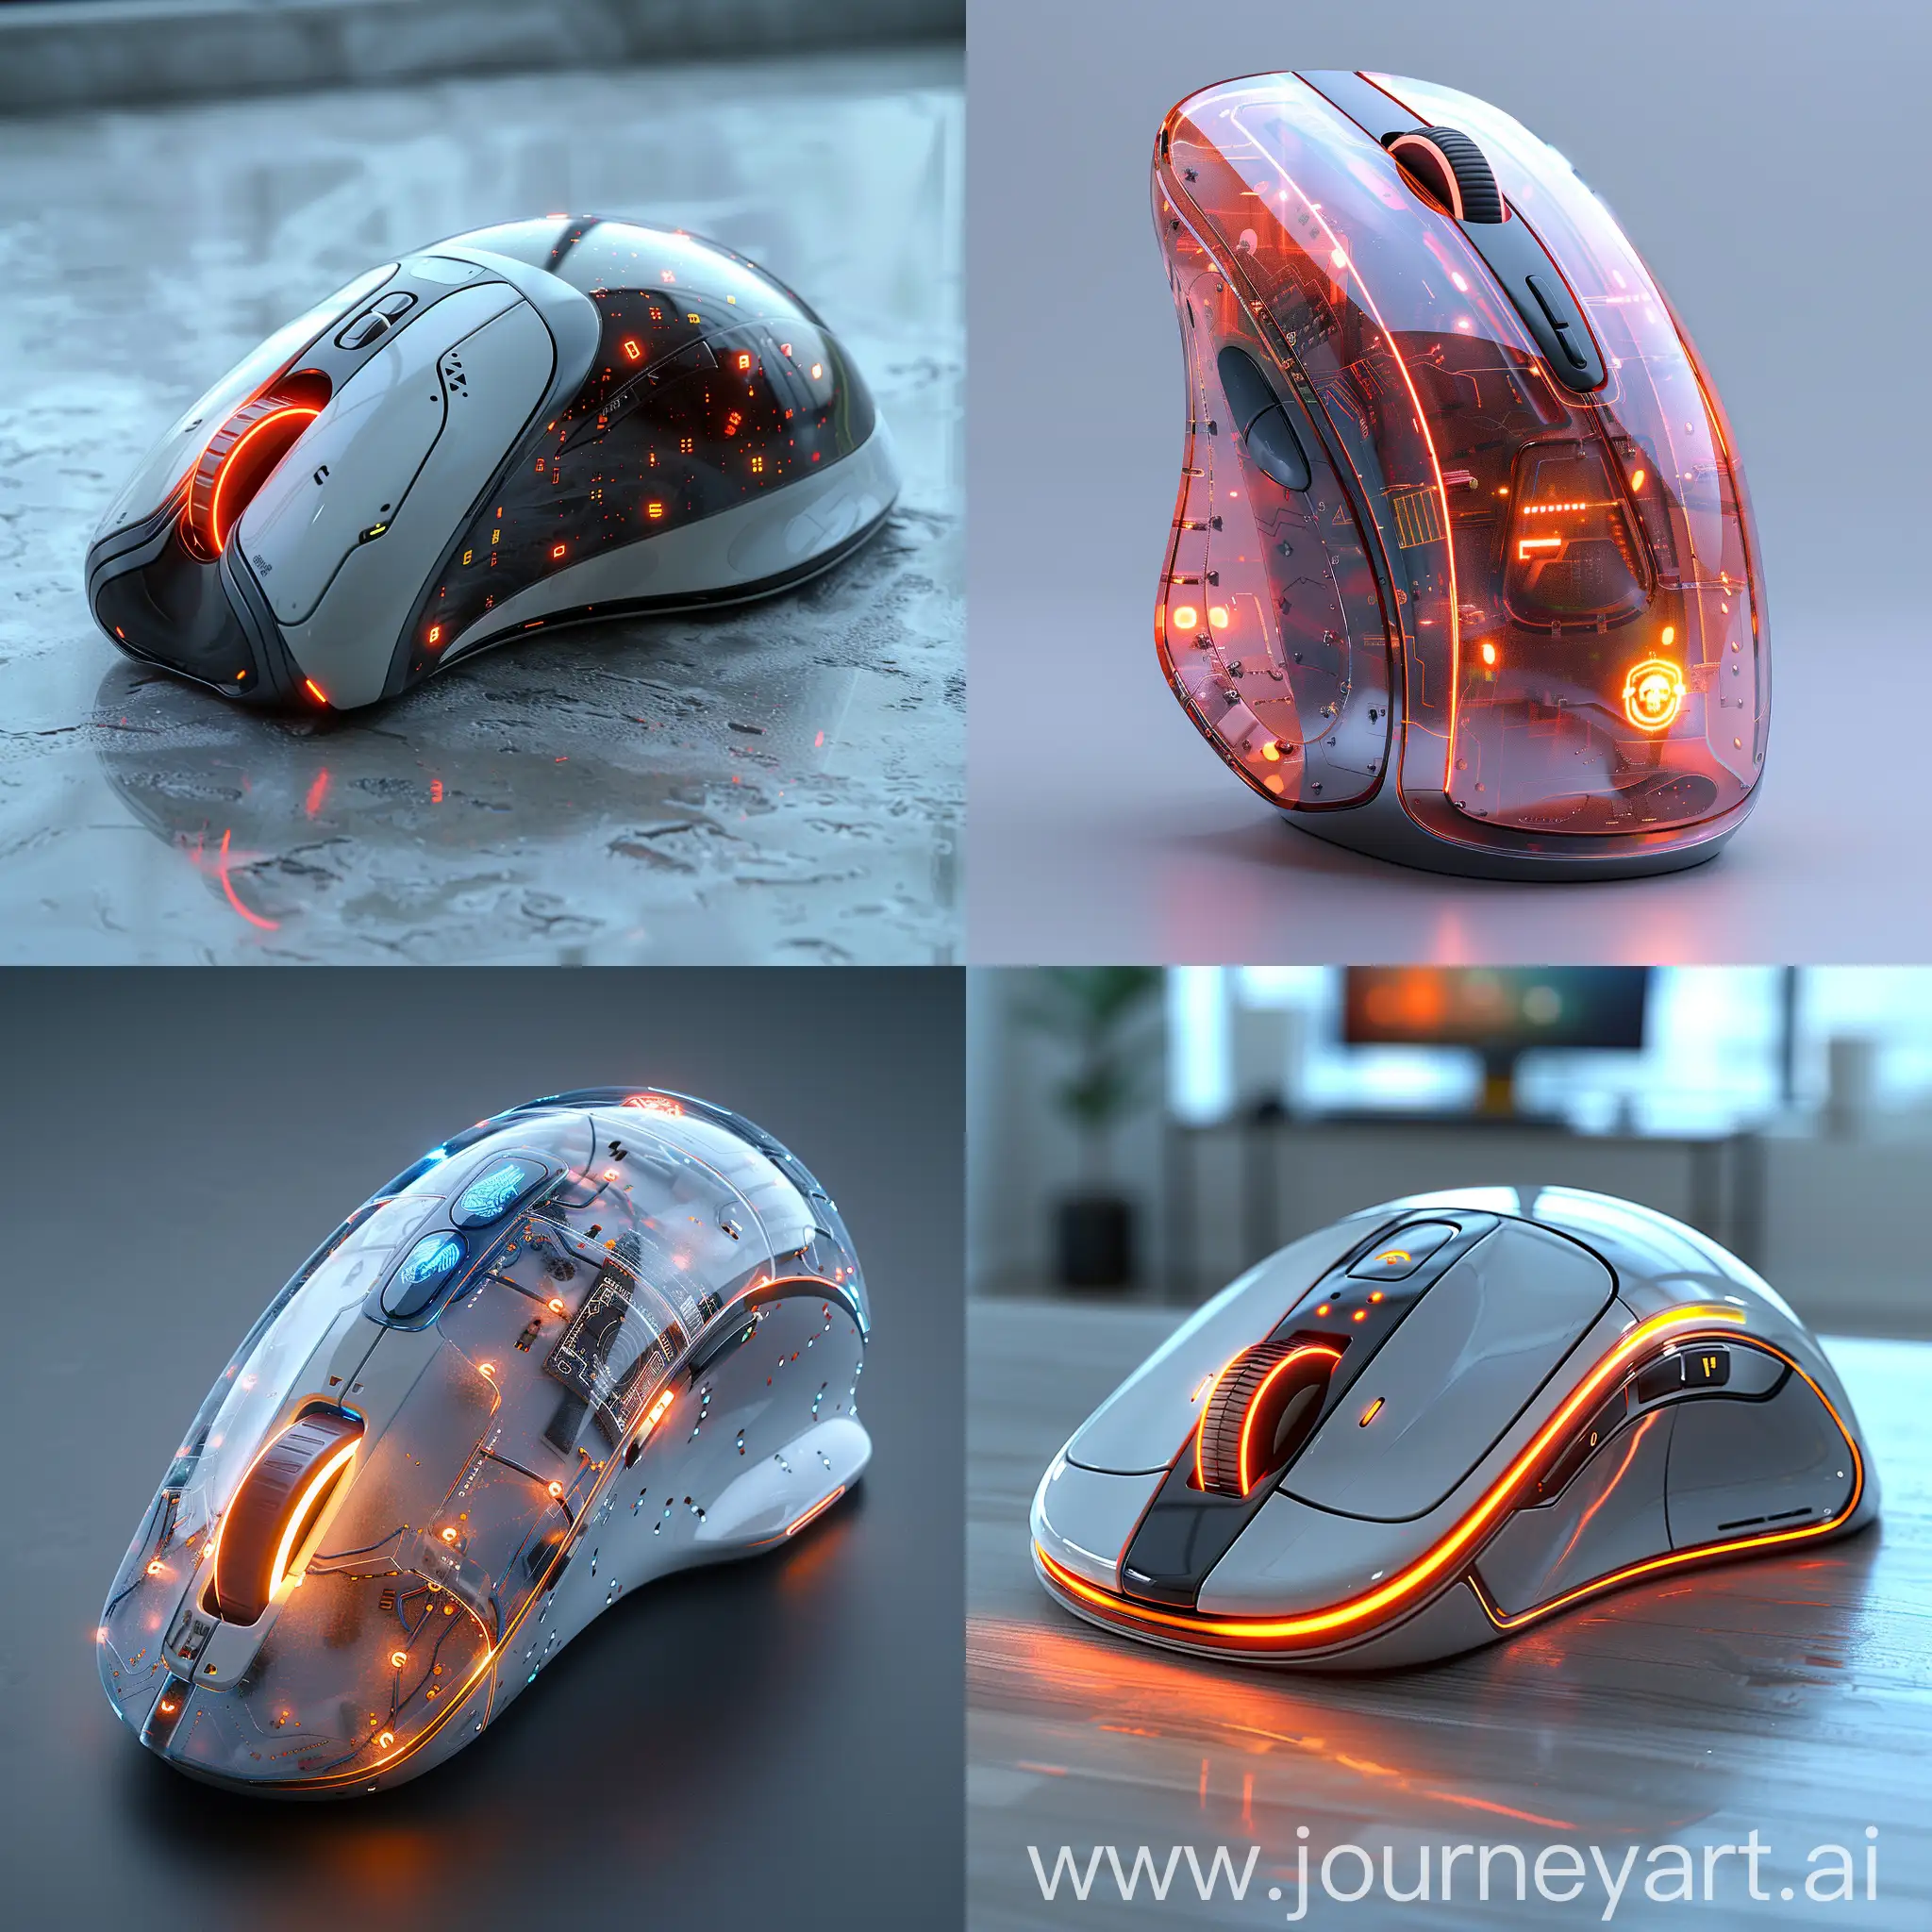 Futuristic-PC-Mouse-with-Holographic-Display-and-Biometric-Sensor